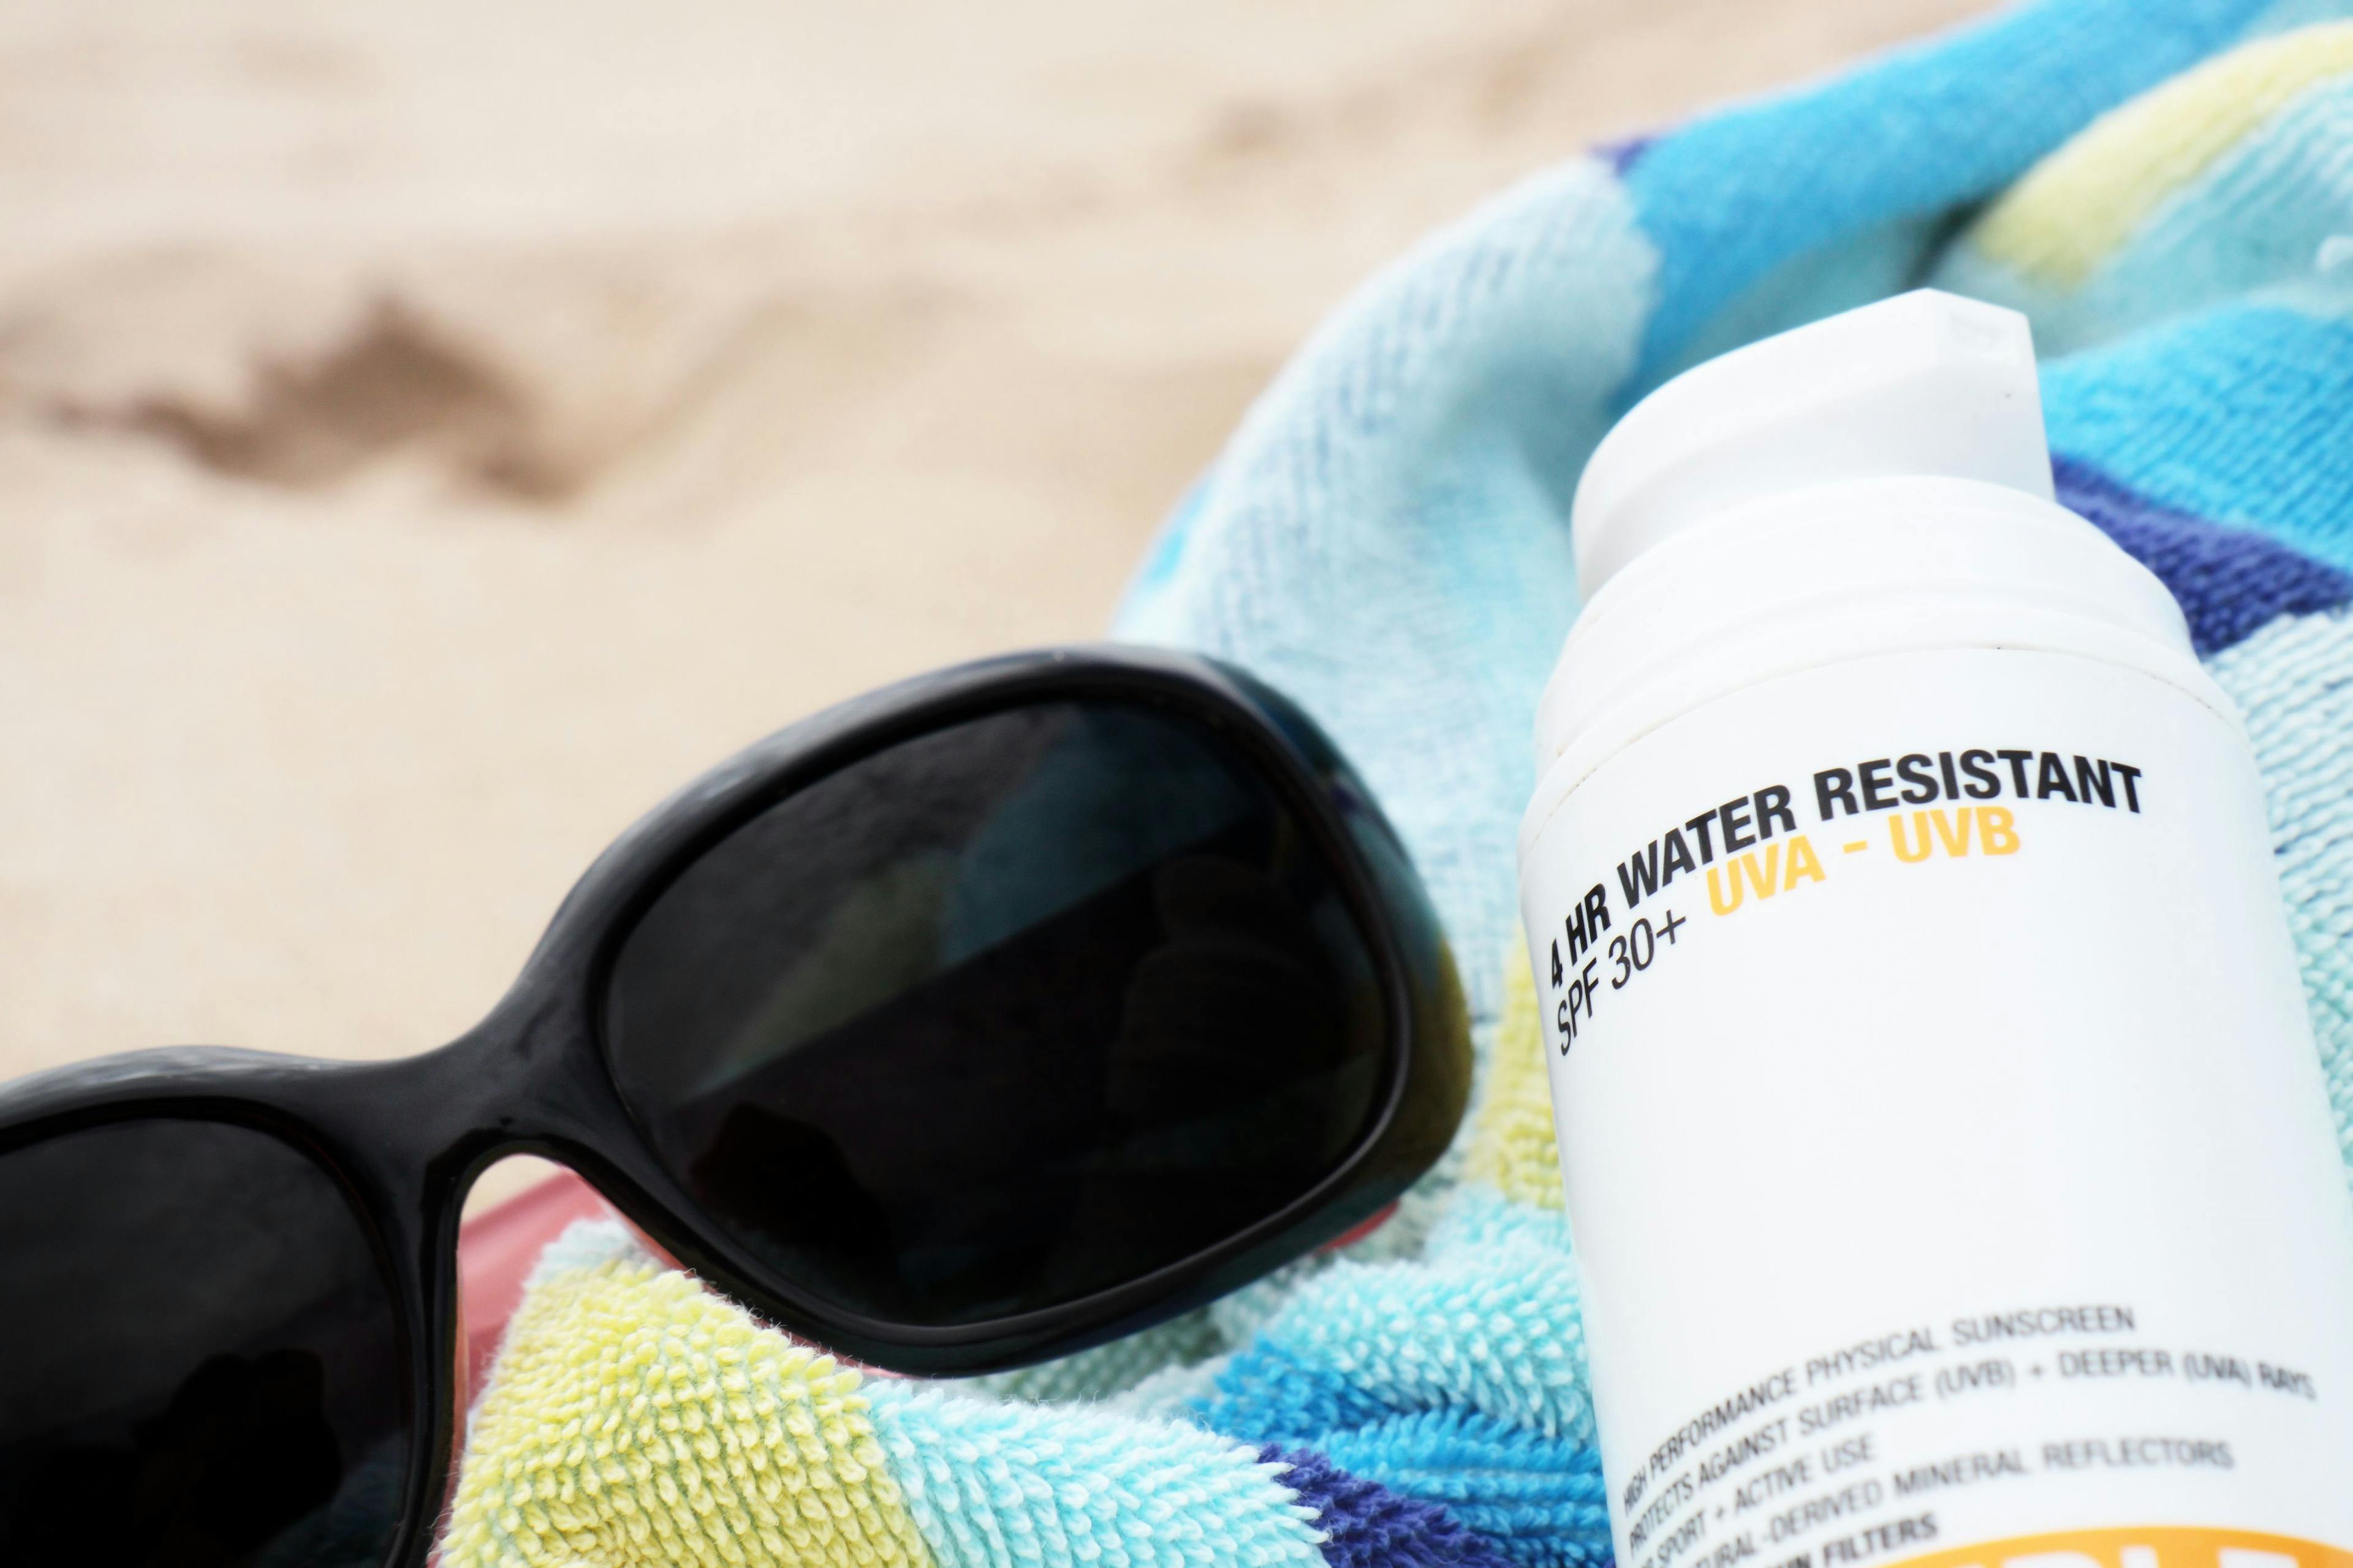 Sunscreens With Cancer-Containing Chemical Get Recalled